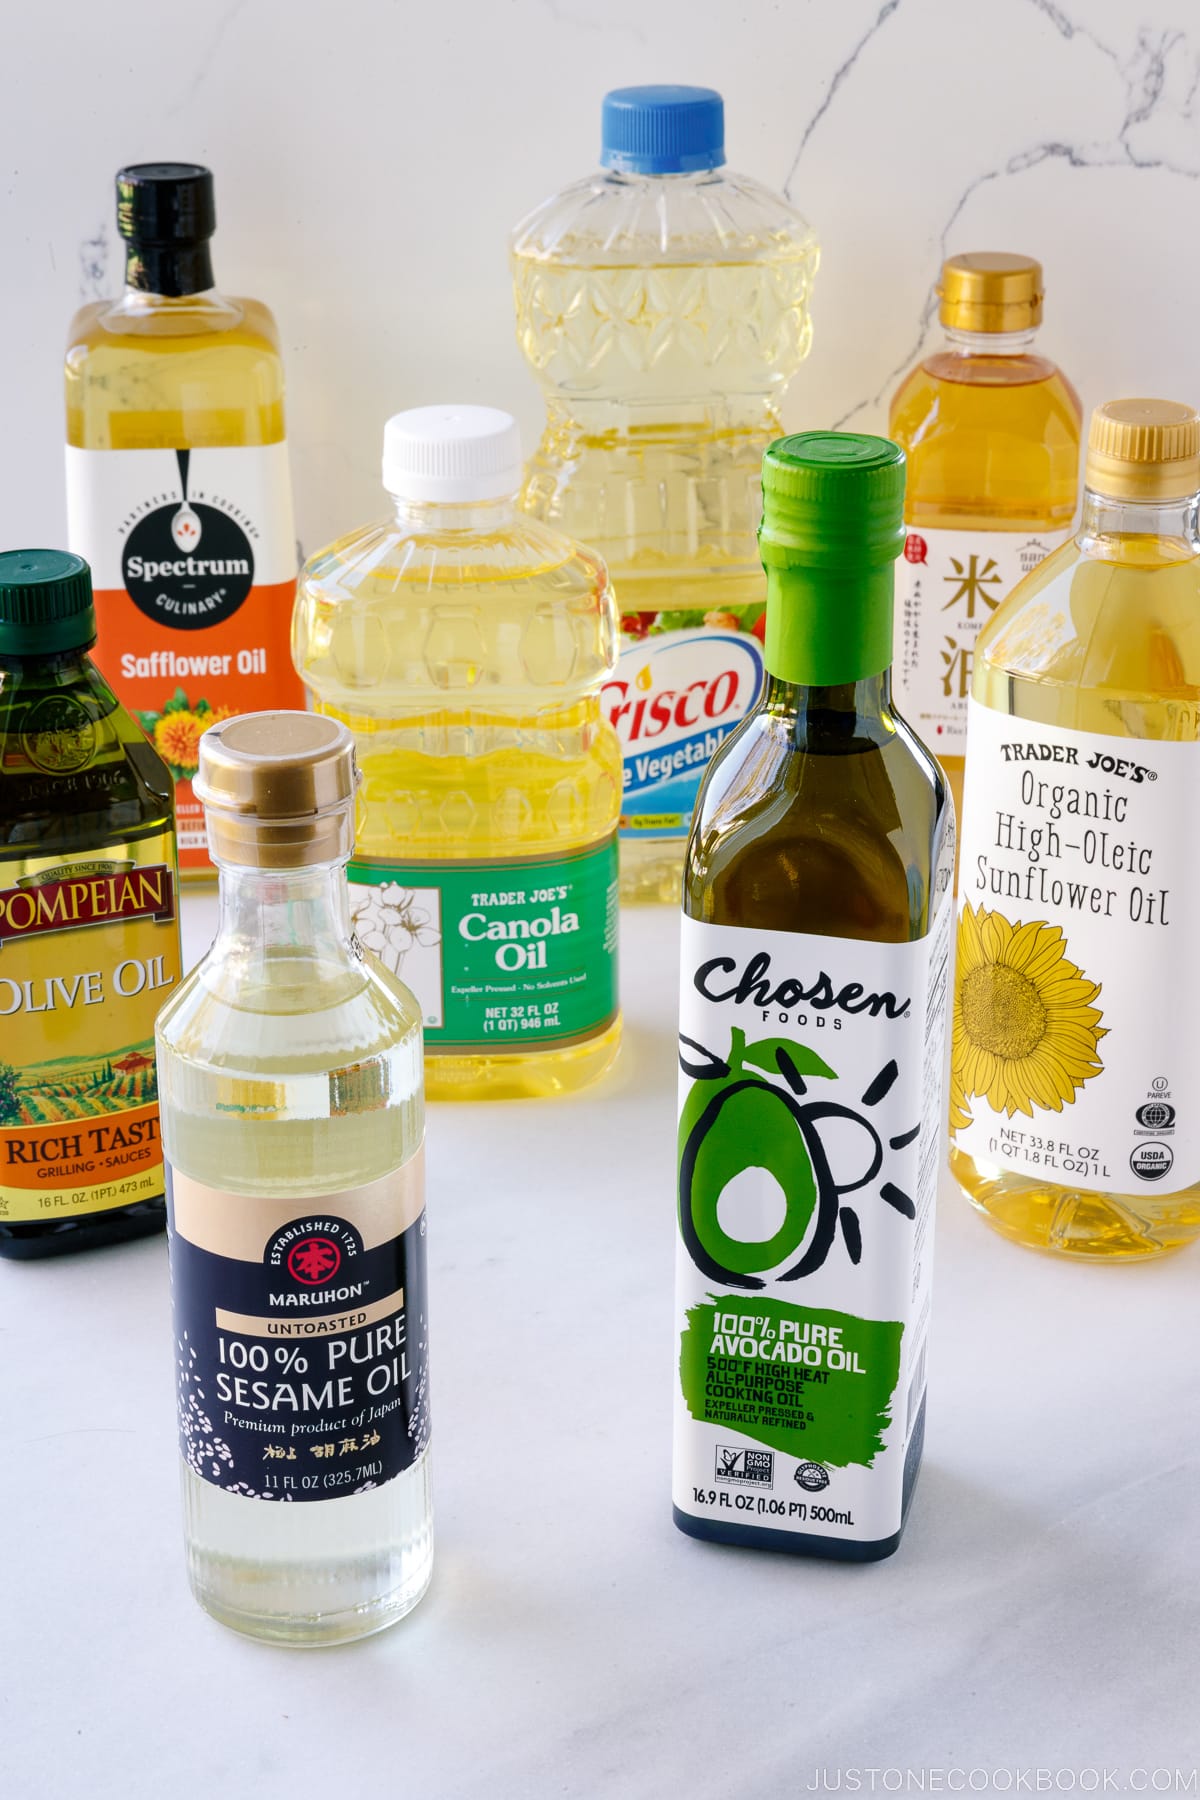 Various types of neural cooking oil displayed on the countertop.